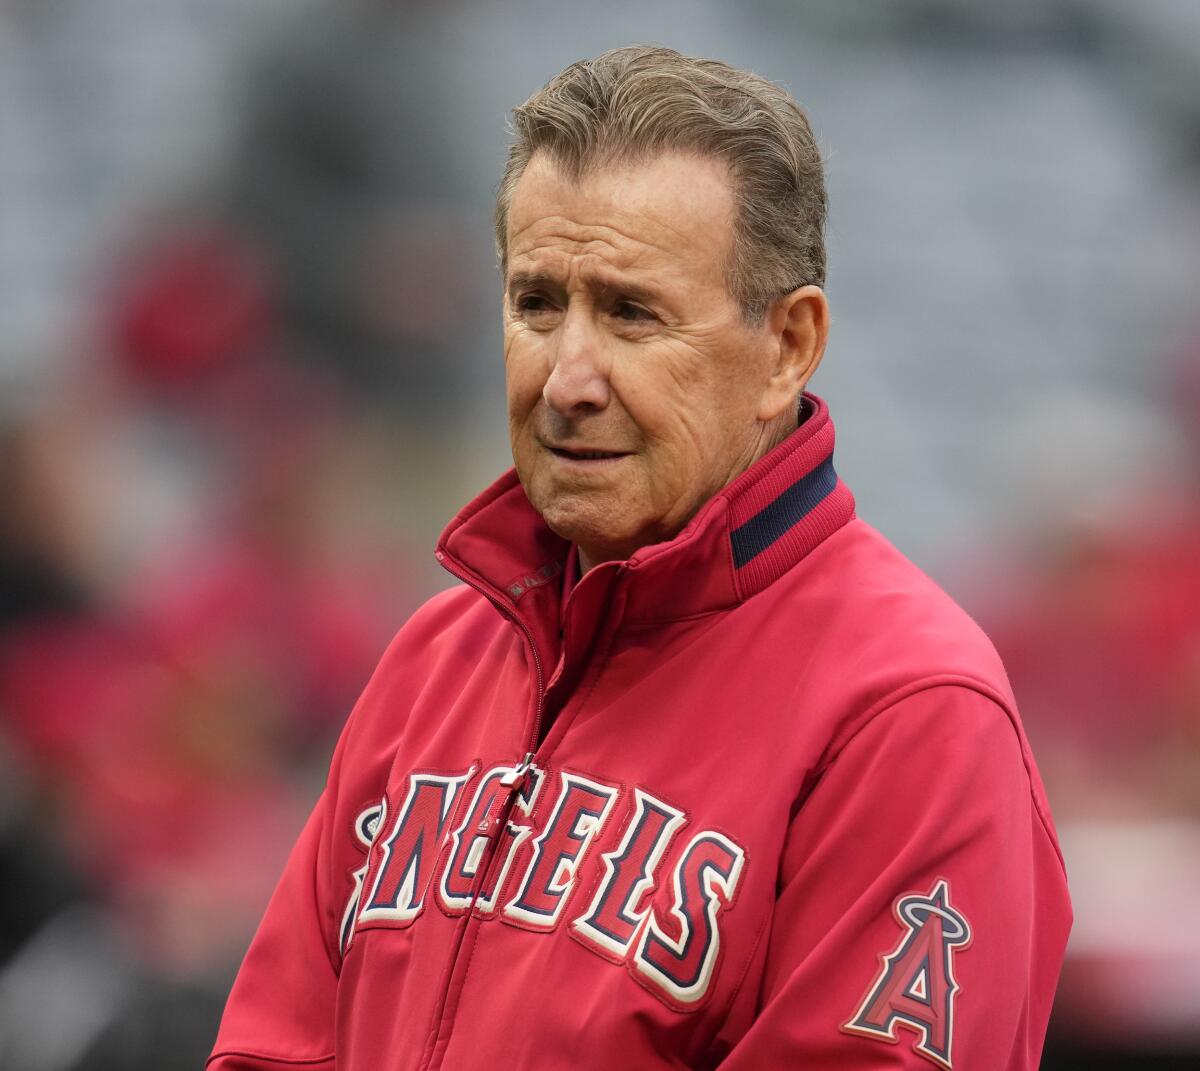 Arte Moreno, owner of the Los Angeles Angels, stands on the field.